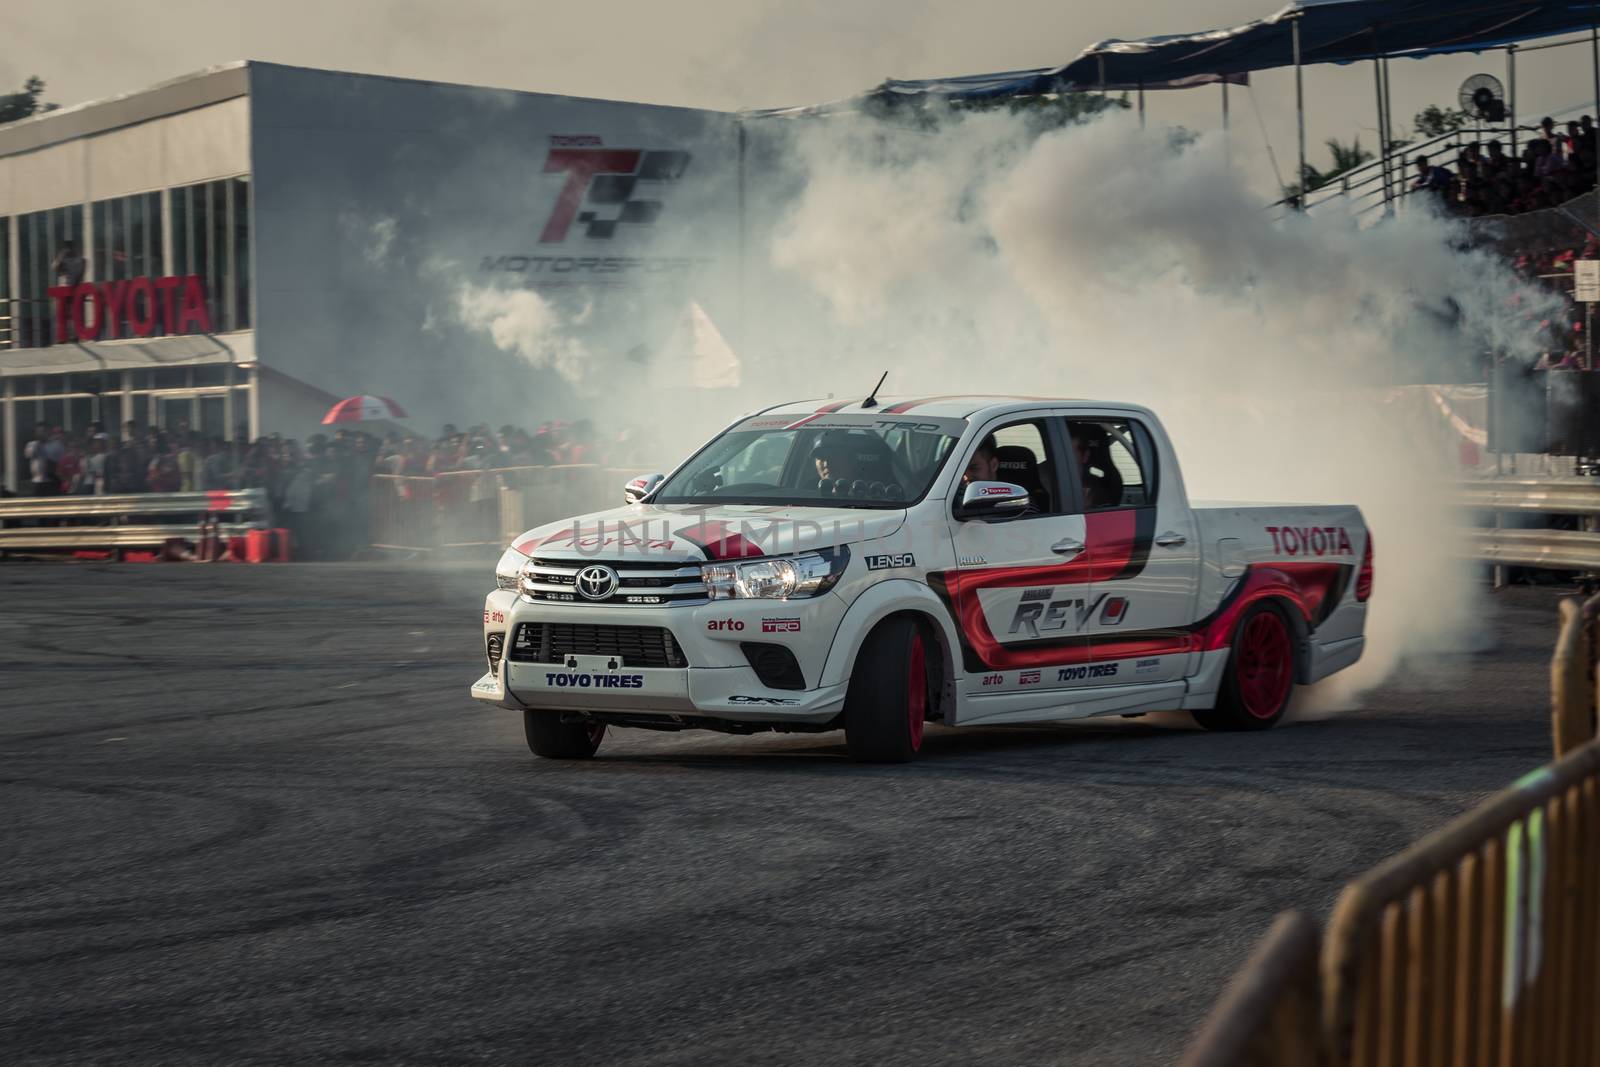 Udon Thani, Thailand - October 18, 2015: Toyota Hilux Revo perform drifting contest on the track between driver from Thailand and Japan at the event Toyota Motor Sport show at Udon Thani, Thailand with motion blur of the background and smoke of the burning tires